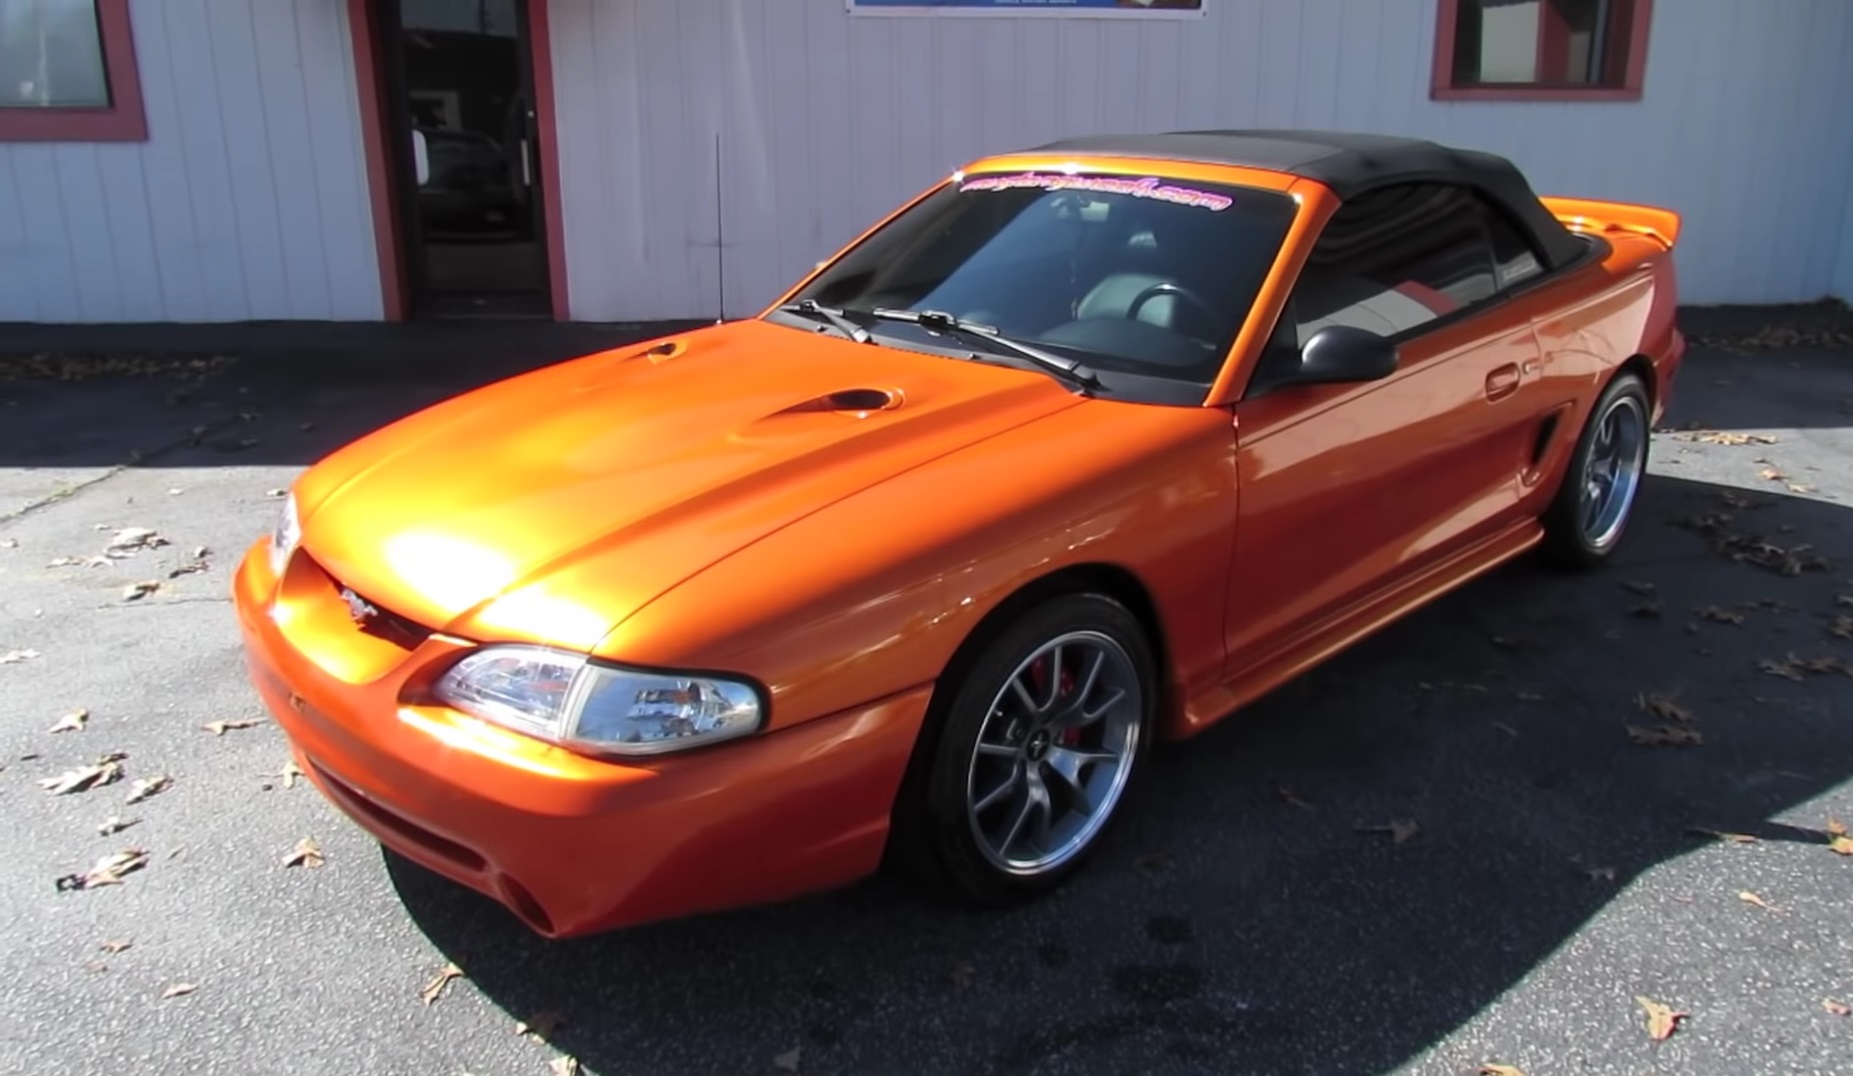 Video: Custom 1995 Ford Mustang GT Convertible In-Depth Tour